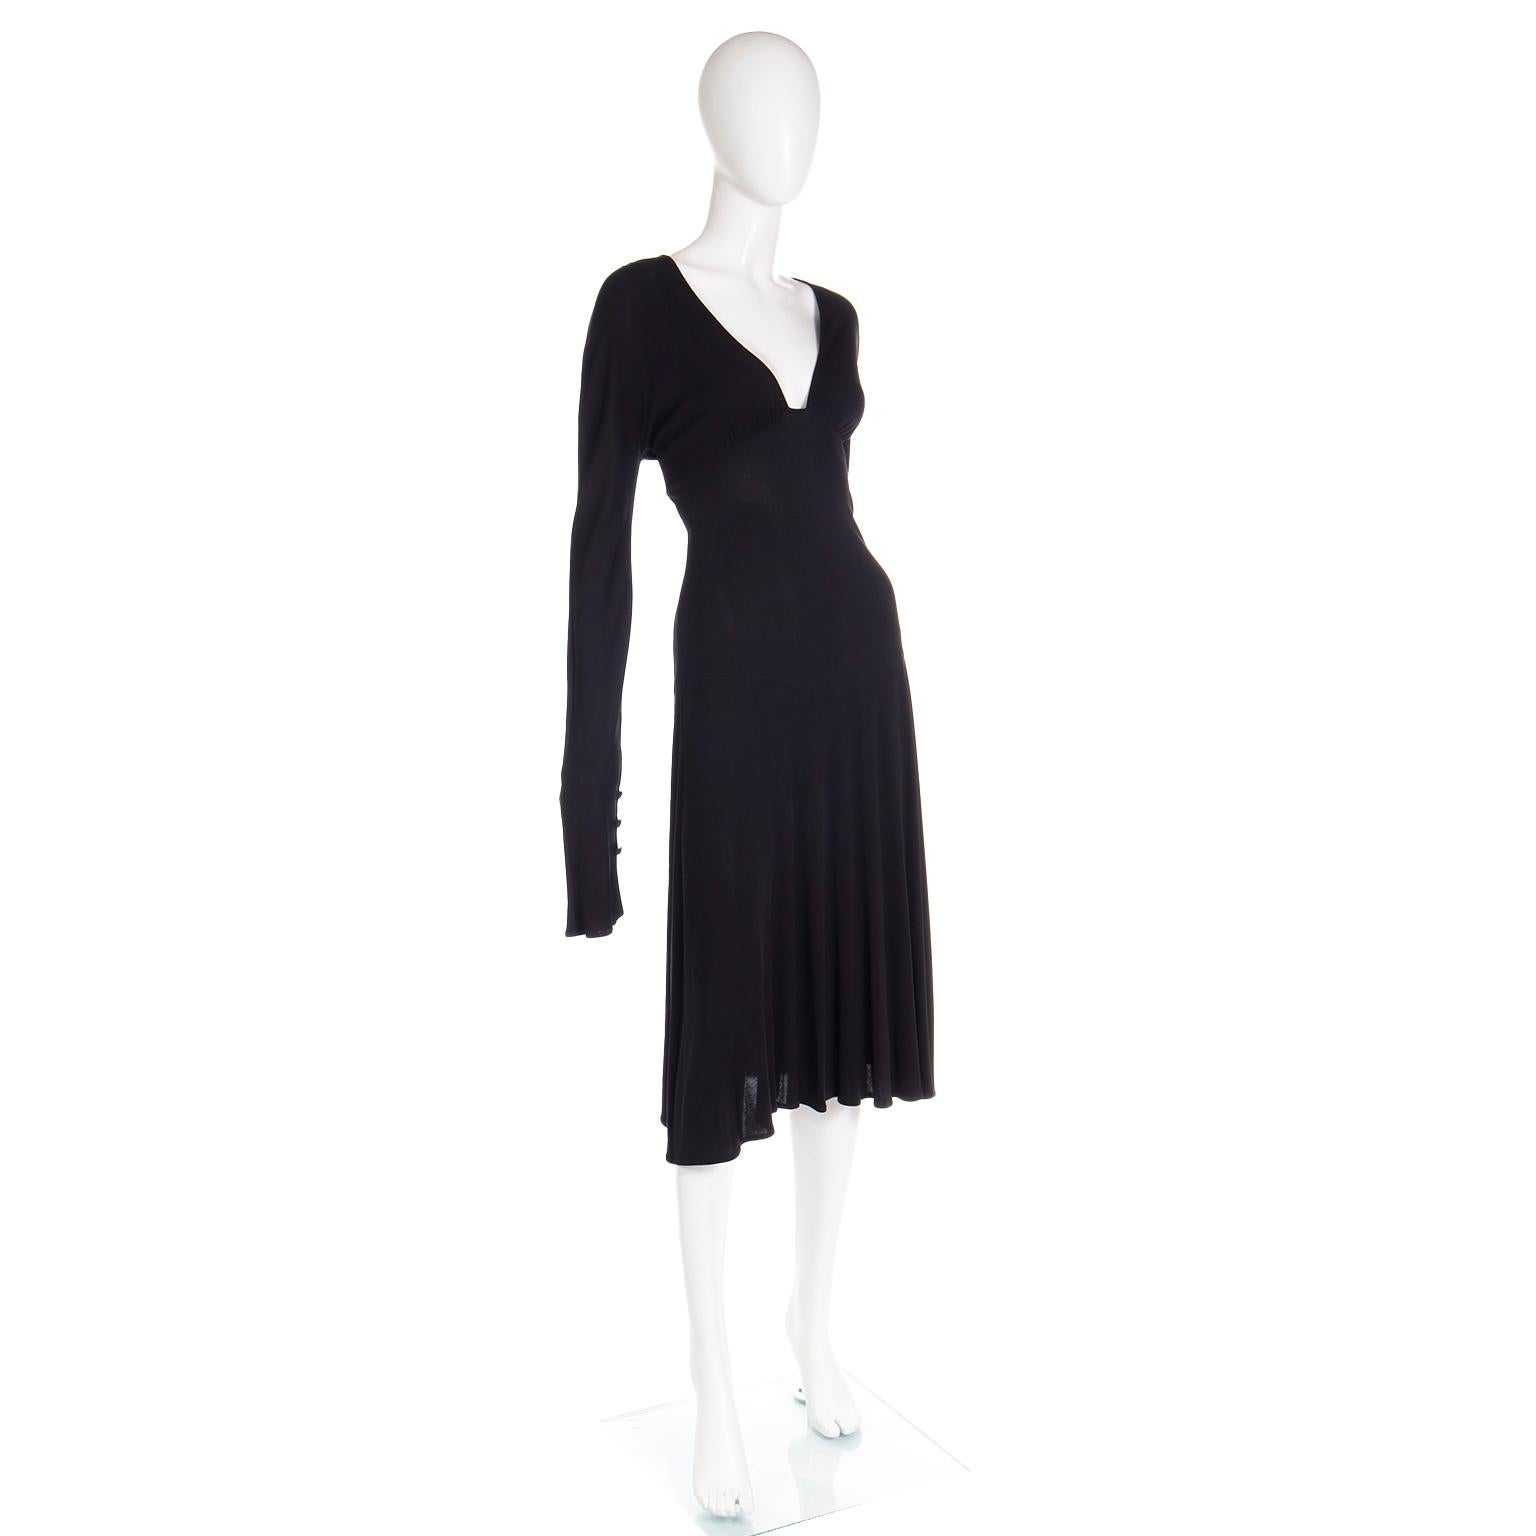 F/W 2002 Gianni Versace Vintage Black Low Plunge Evening Dress Runway Documented For Sale 2